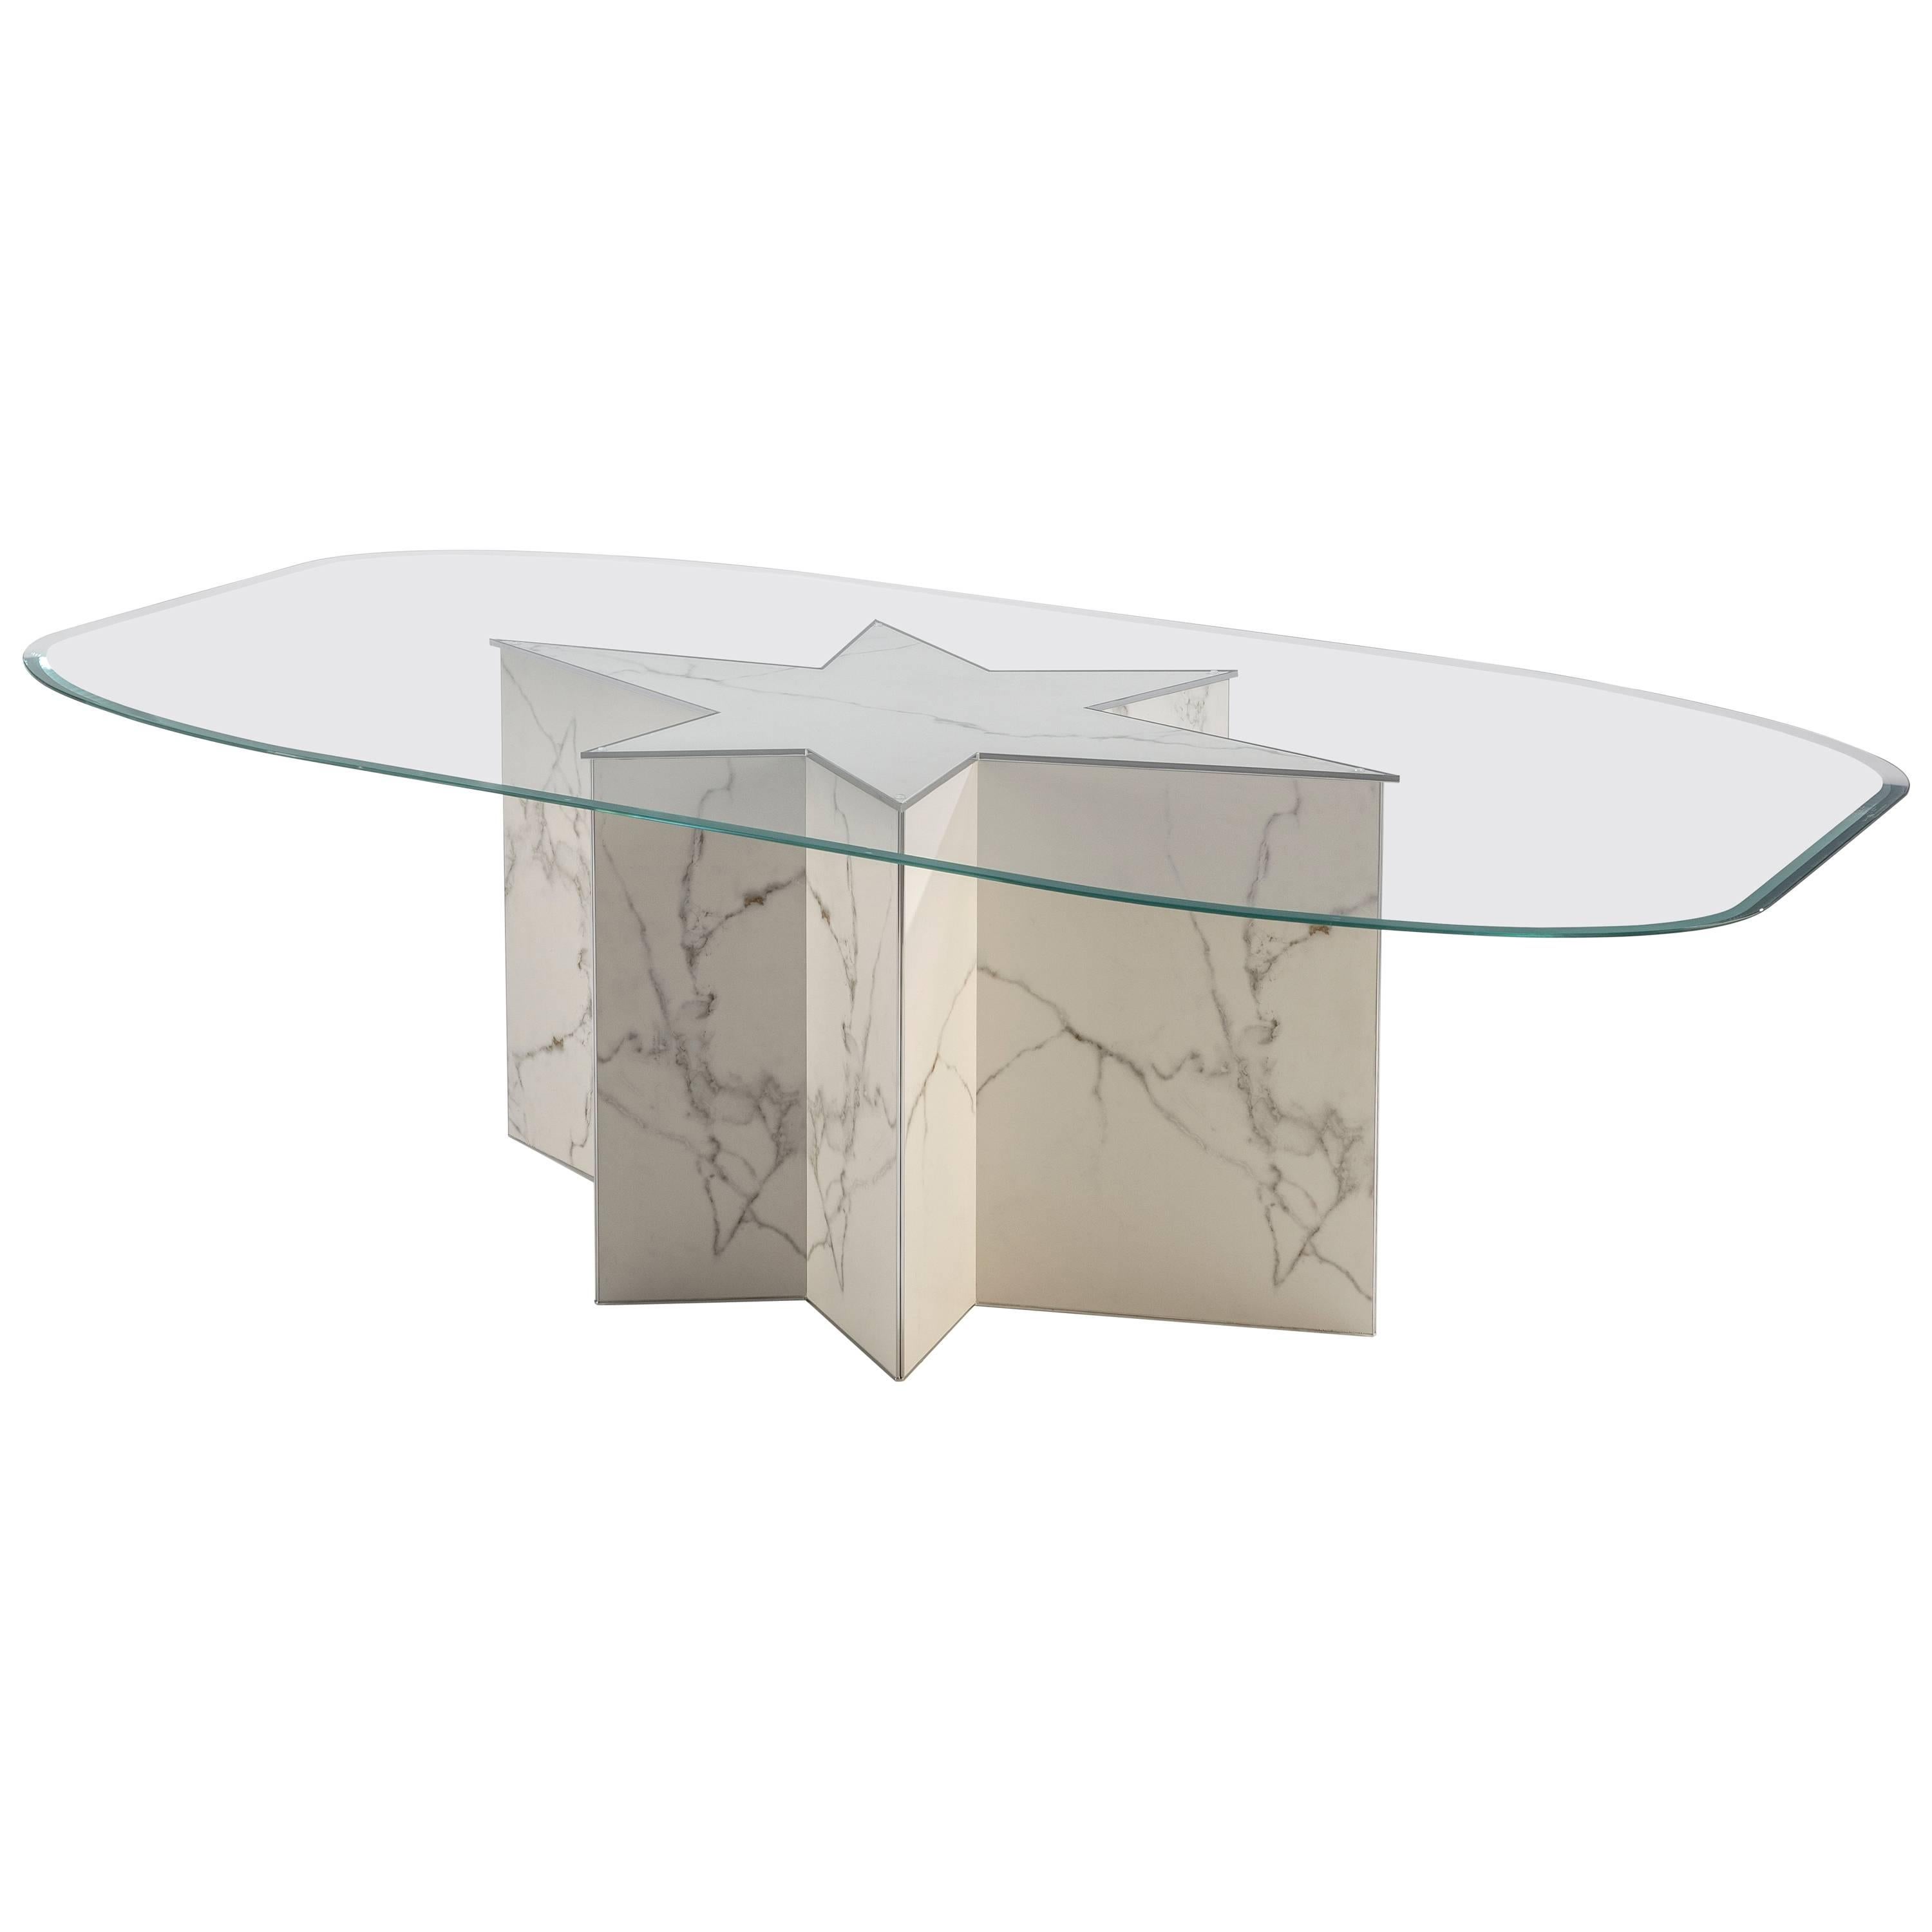 Caterina Licitra "Tributo A Gio Ponti" Star Dinning Table